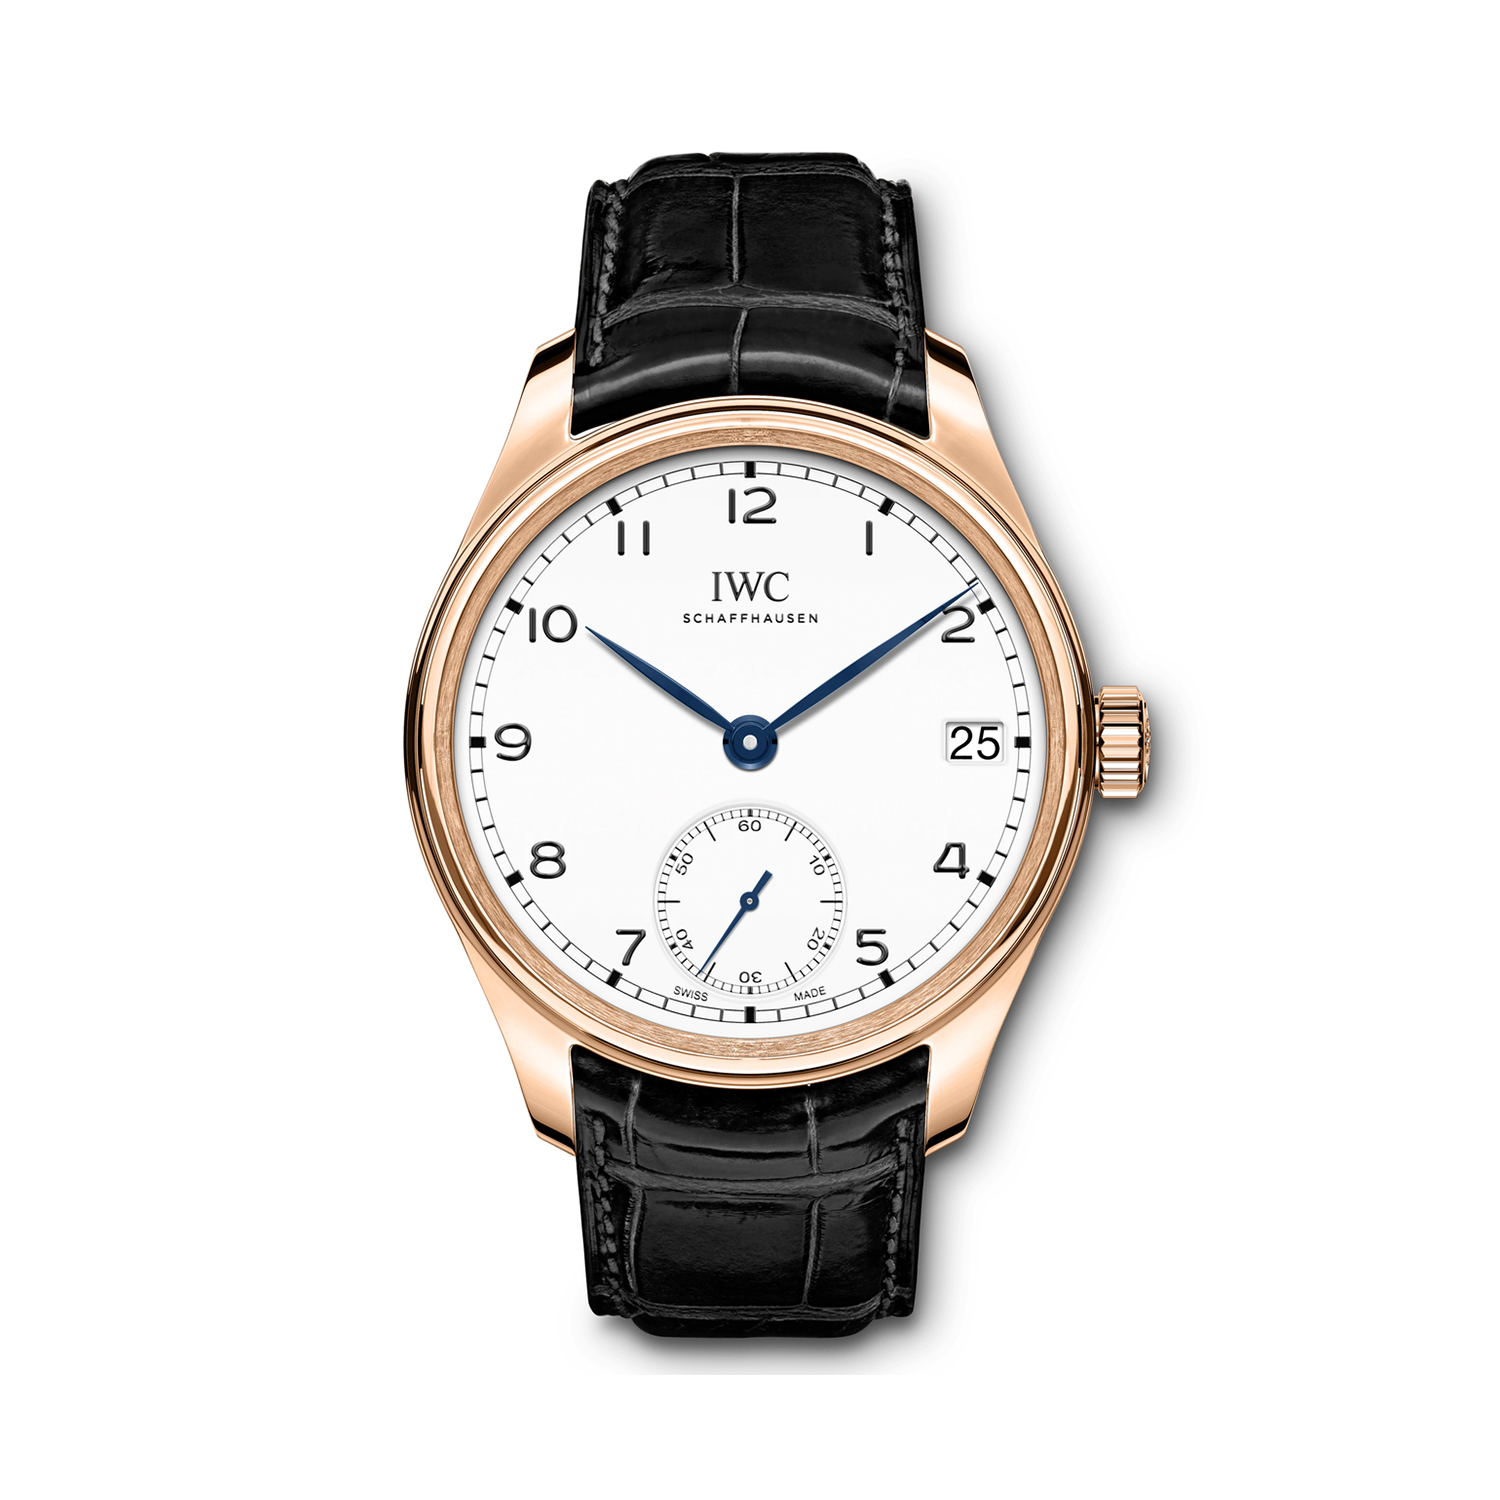 Montre portugieser remontage manuel huit jours edition "150 years" - Iwc